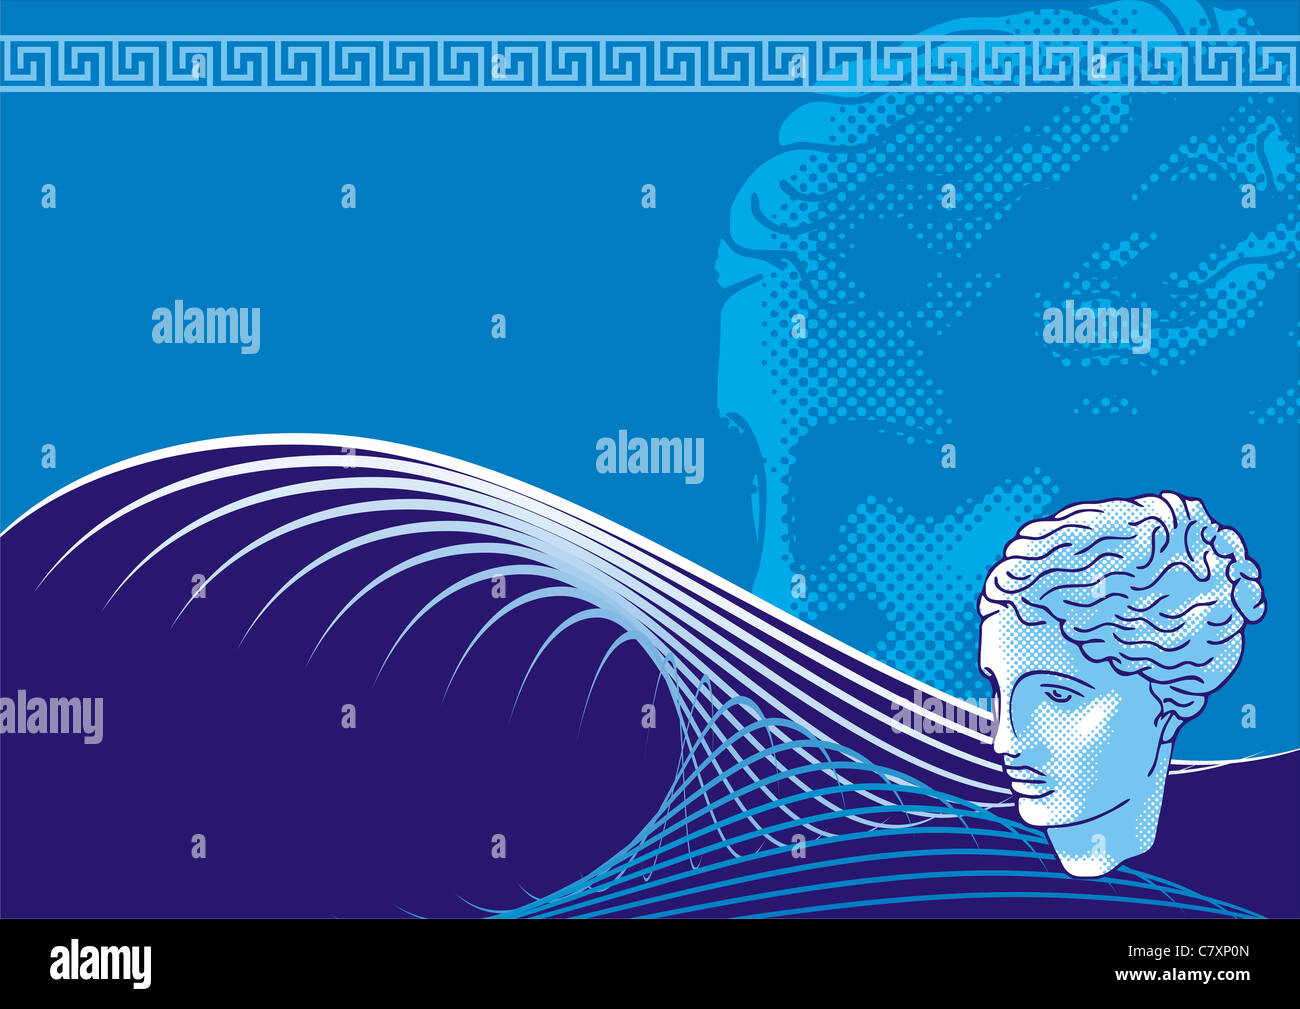 Venus head in blue background. Great for presentations or a page layout. Stock Photo